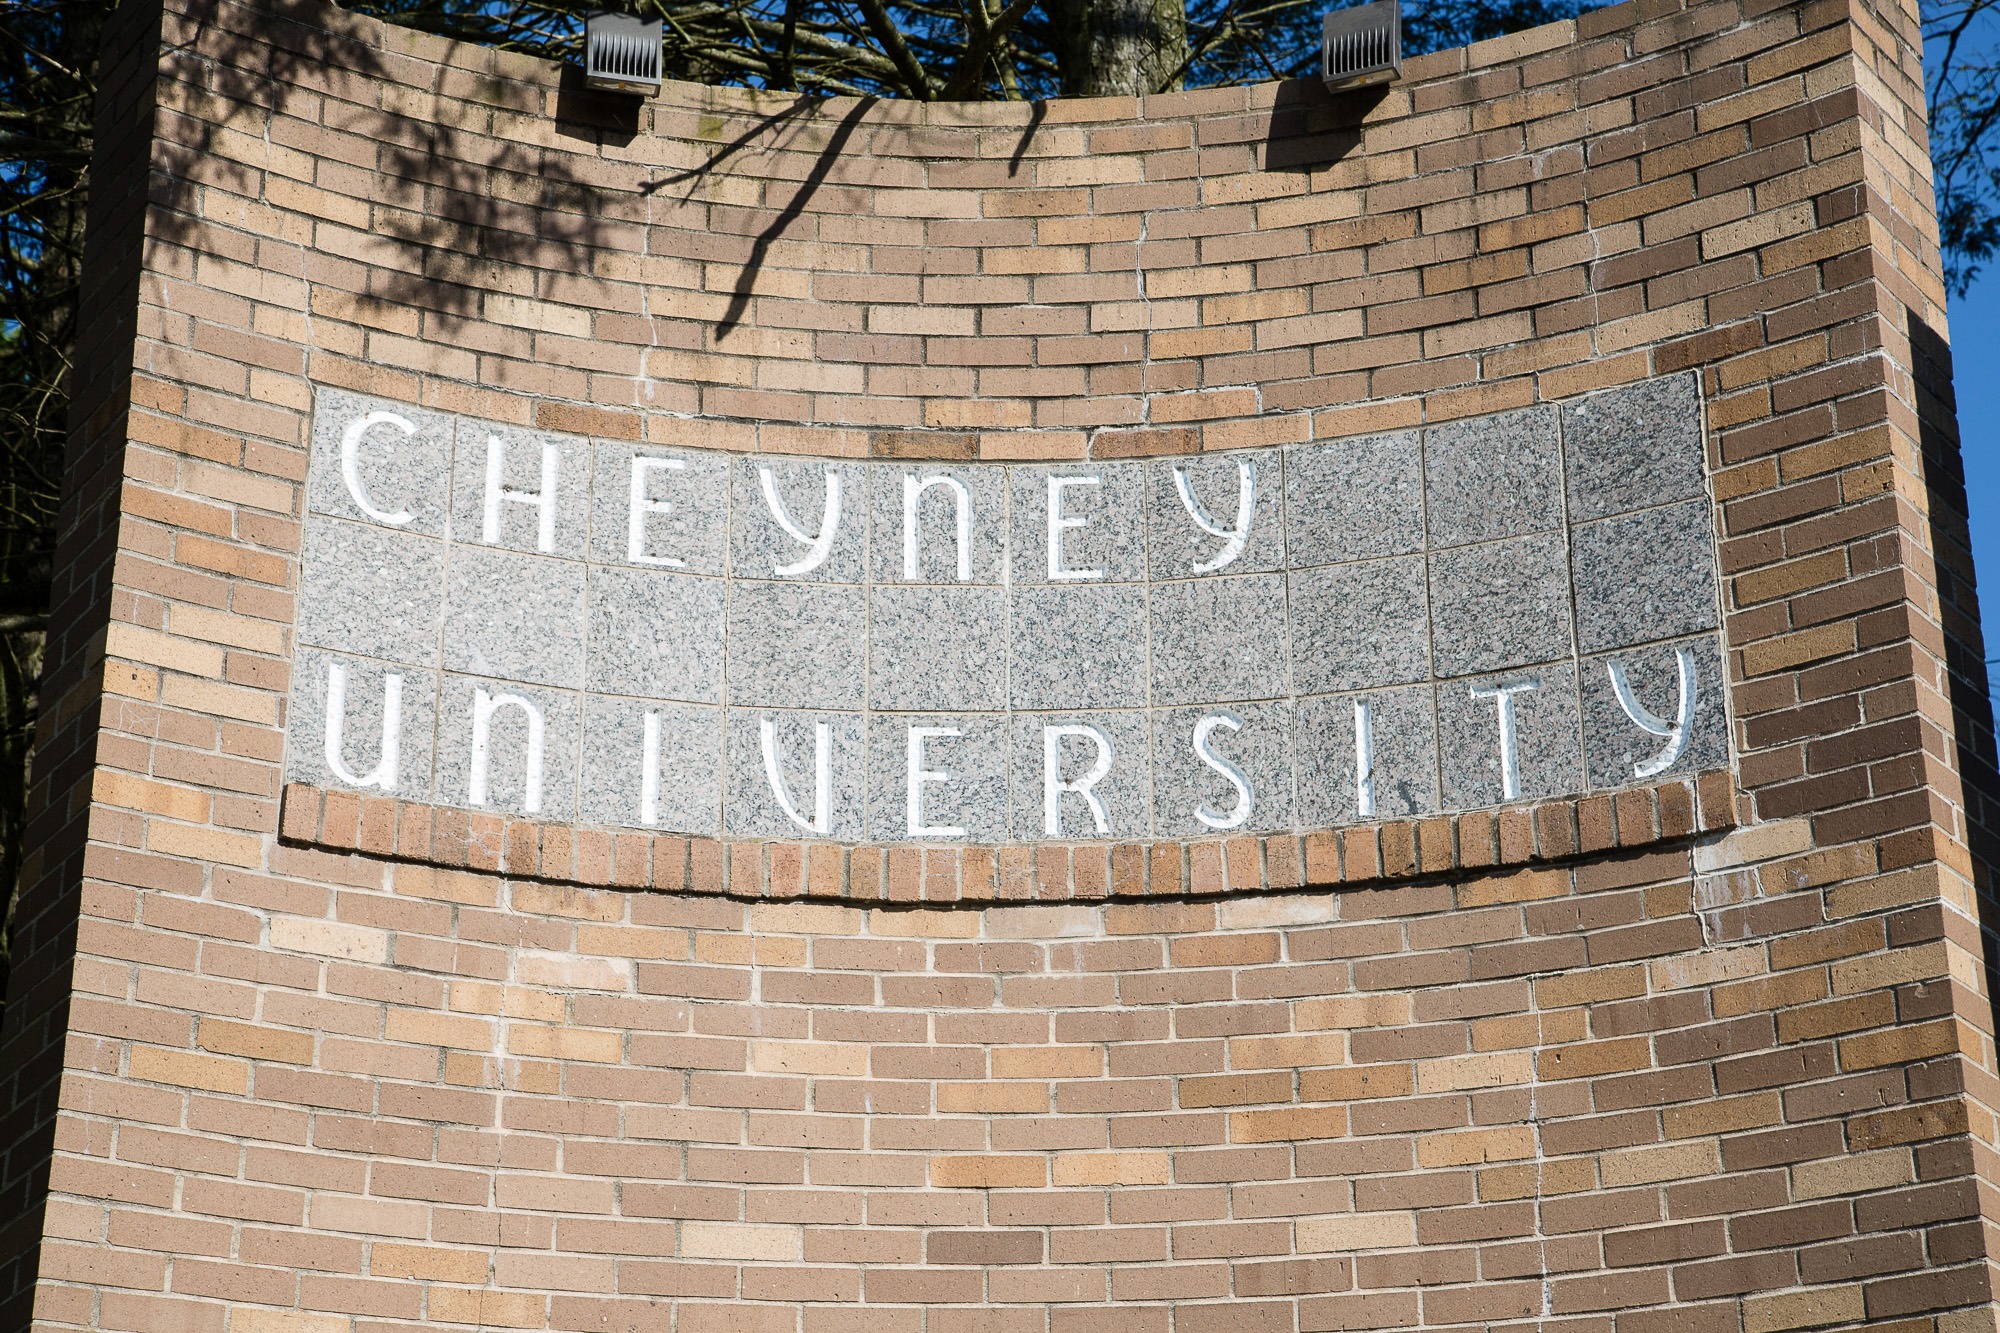 Founded on this day in 1837, Cheyney University Celebrates Its Legacy as the Nation’s Oldest HBCU